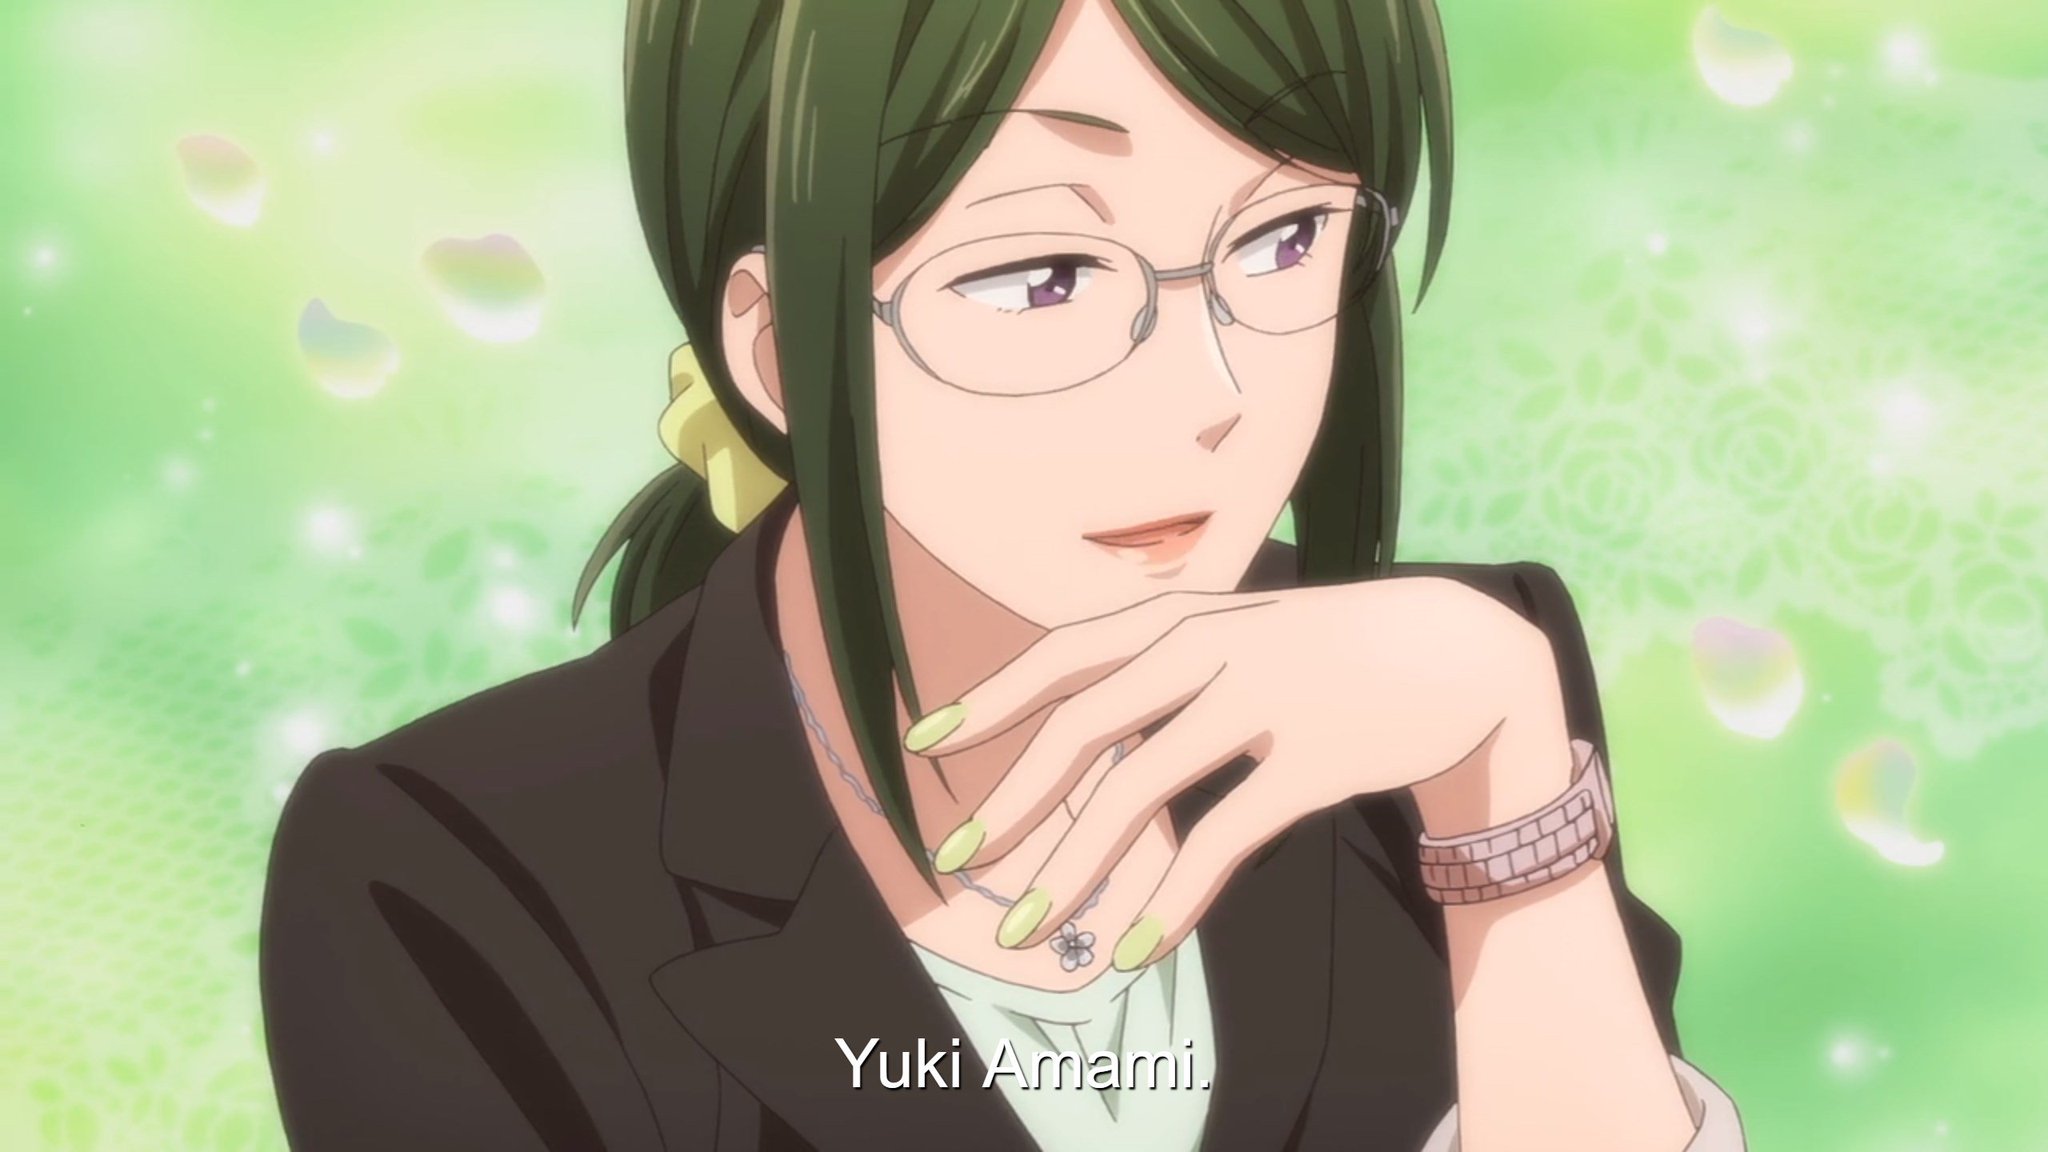 vestenet @ Birdie Wing AOTY on X: speaking of bi Wotakoi characters, does  anyone know of an anime character named Yuki Amami that Hanako might be  referring to in regards to her